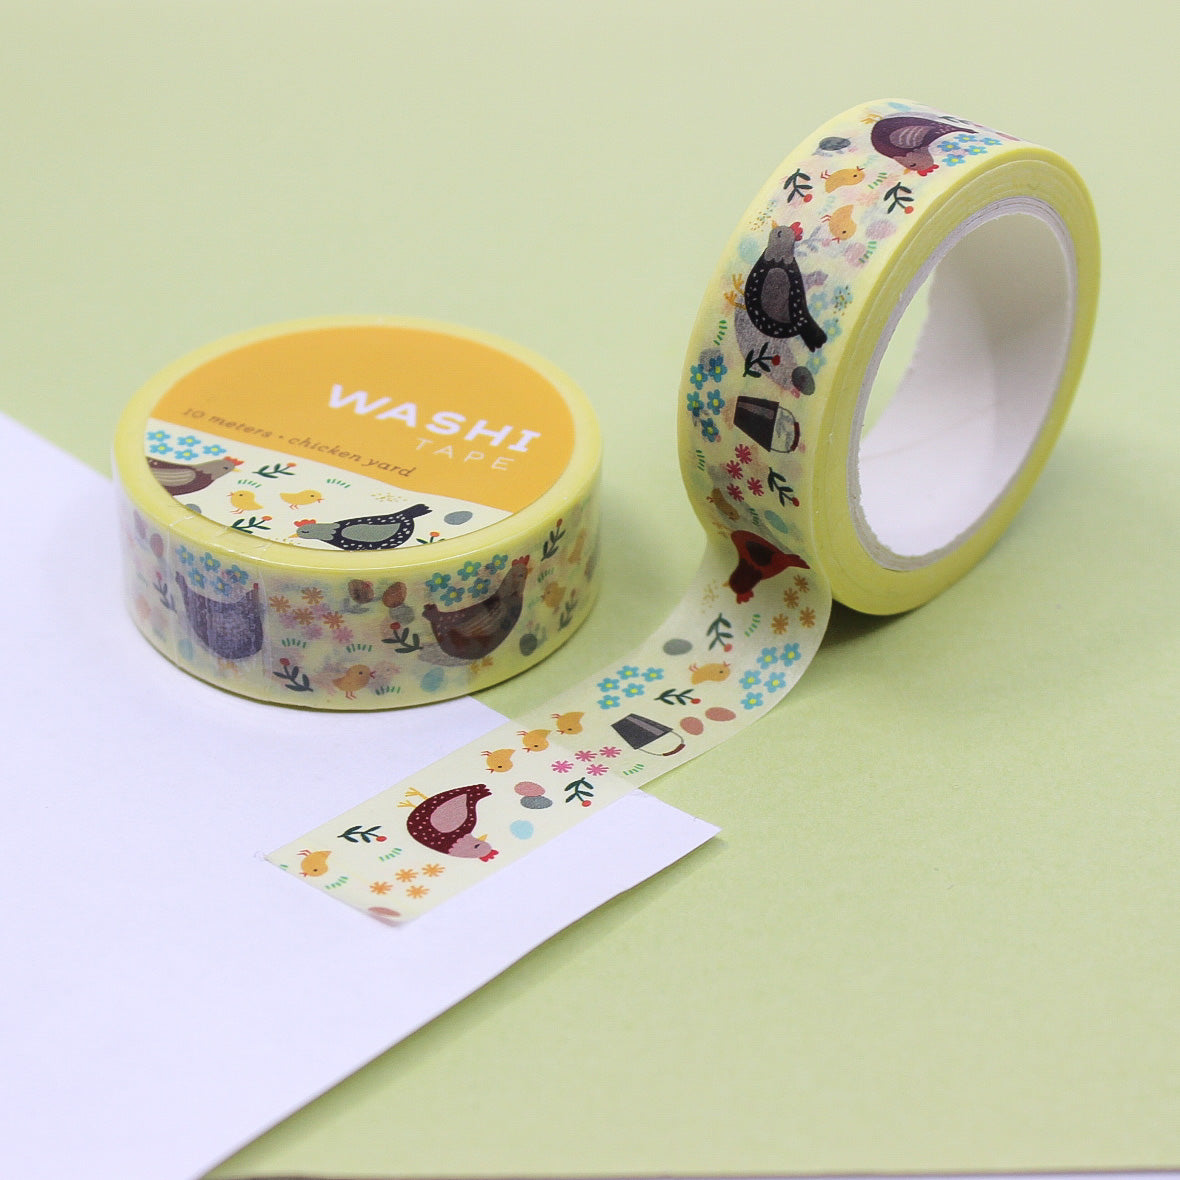 Charming illustrations of chickens for a rustic touch in crafts. Ideal for scrapbooking and journaling. High-quality and easy to use. This tape is from Girl of All Work and sold at BBB Supplies Craft Shop.